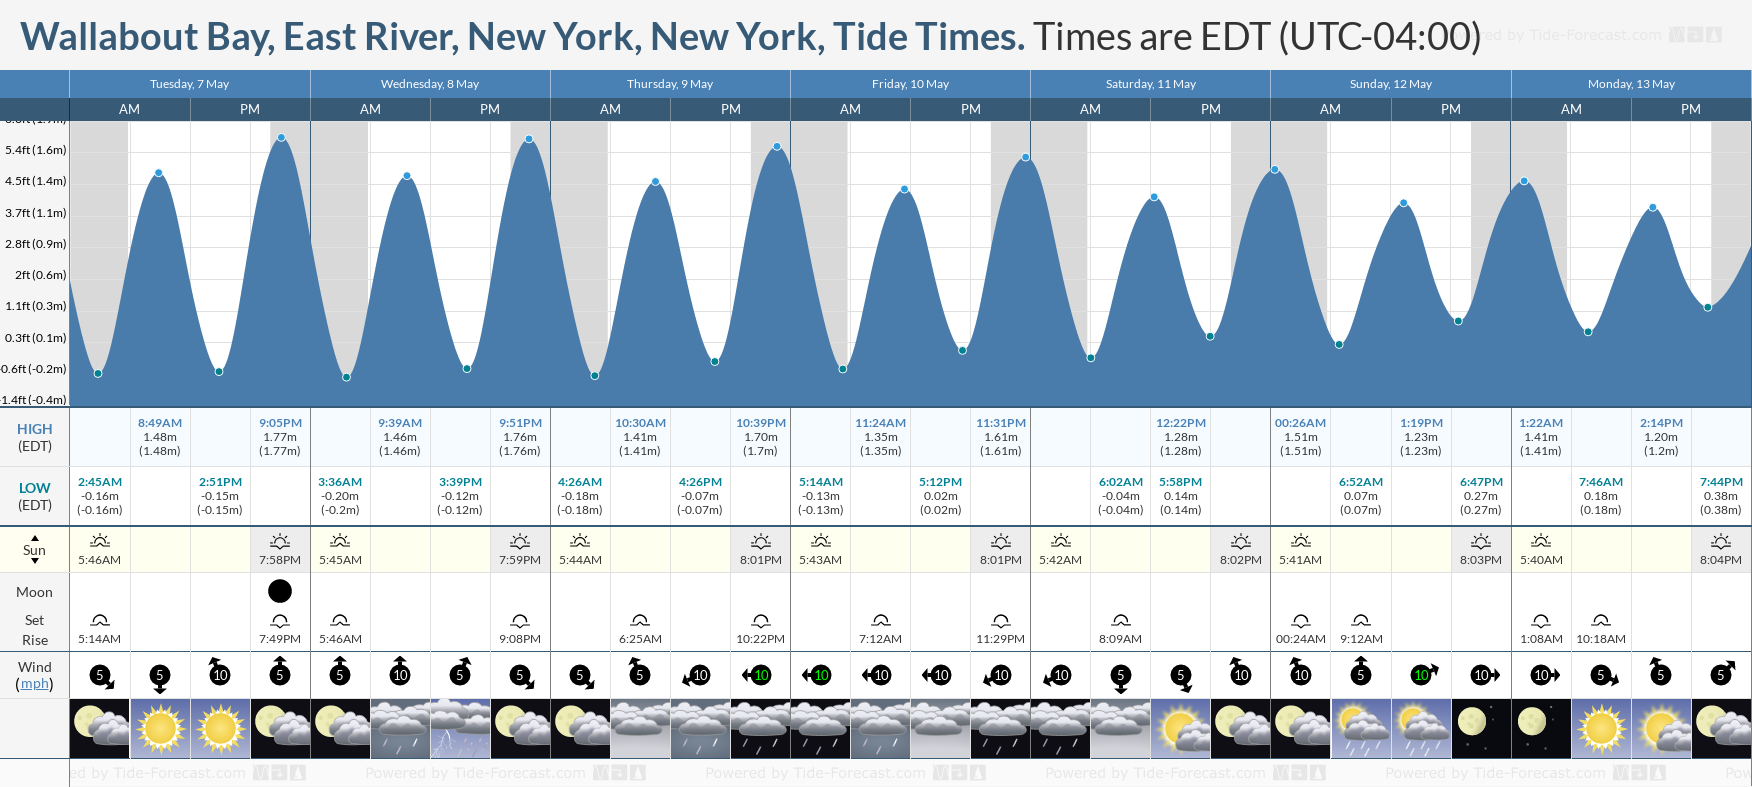 Wallabout Bay, East River, New York, New York Tide Chart including high and low tide tide times for the next 7 days